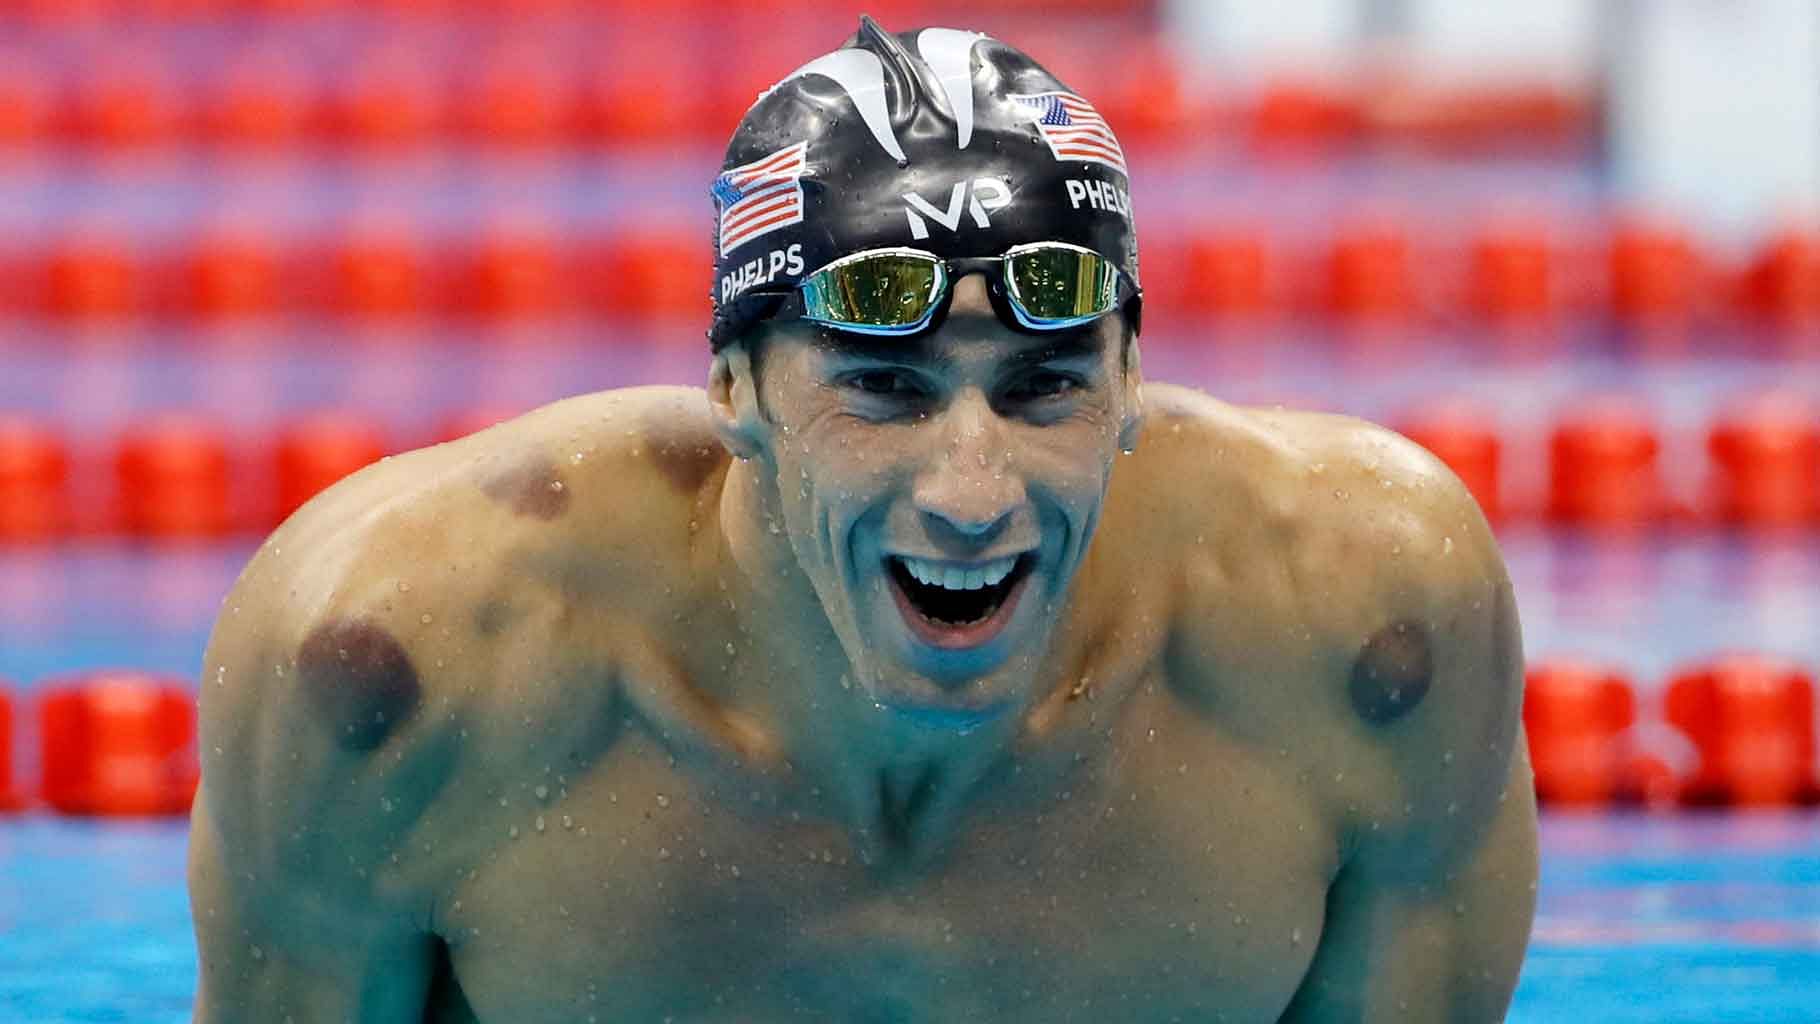 The champion swimmer and Olympian record breaker spoke about a his battle with depression.